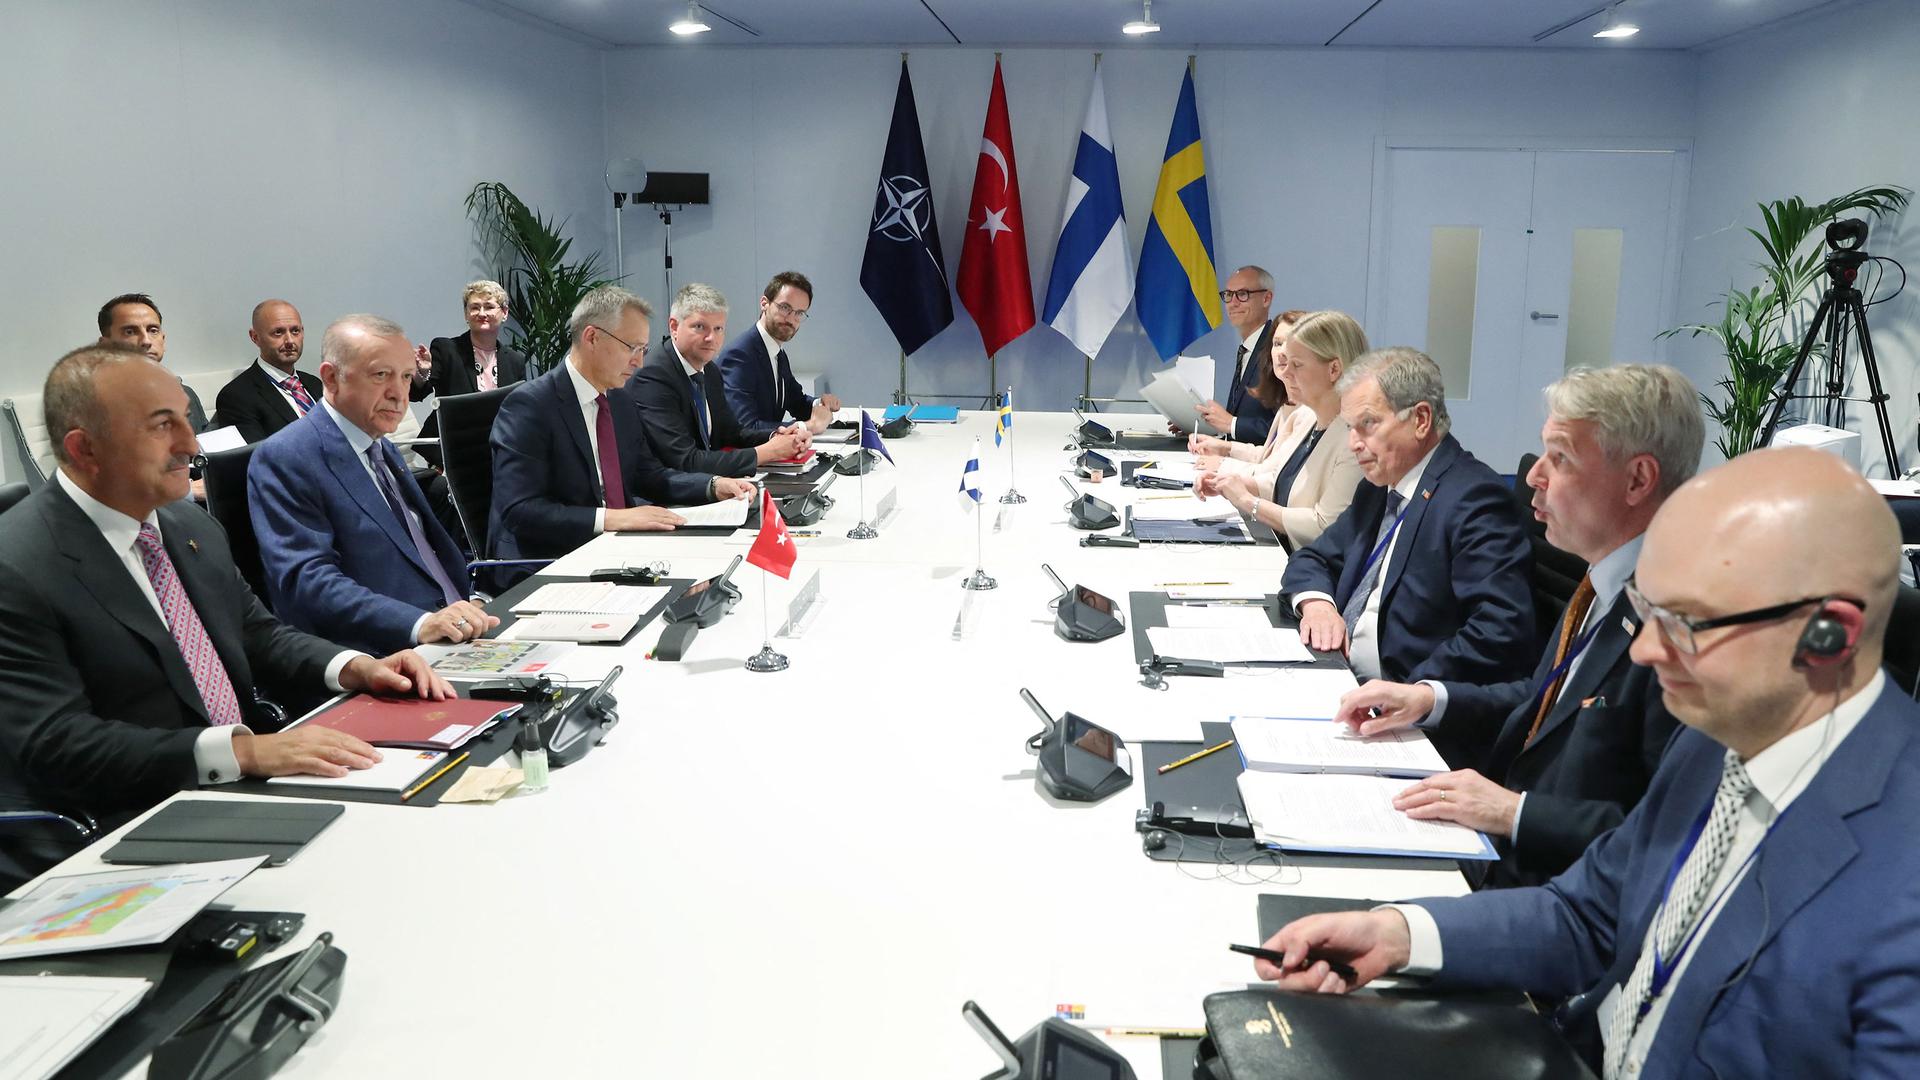 Meeting between Finnish, Swedish and Turkish delegations before NATO summit